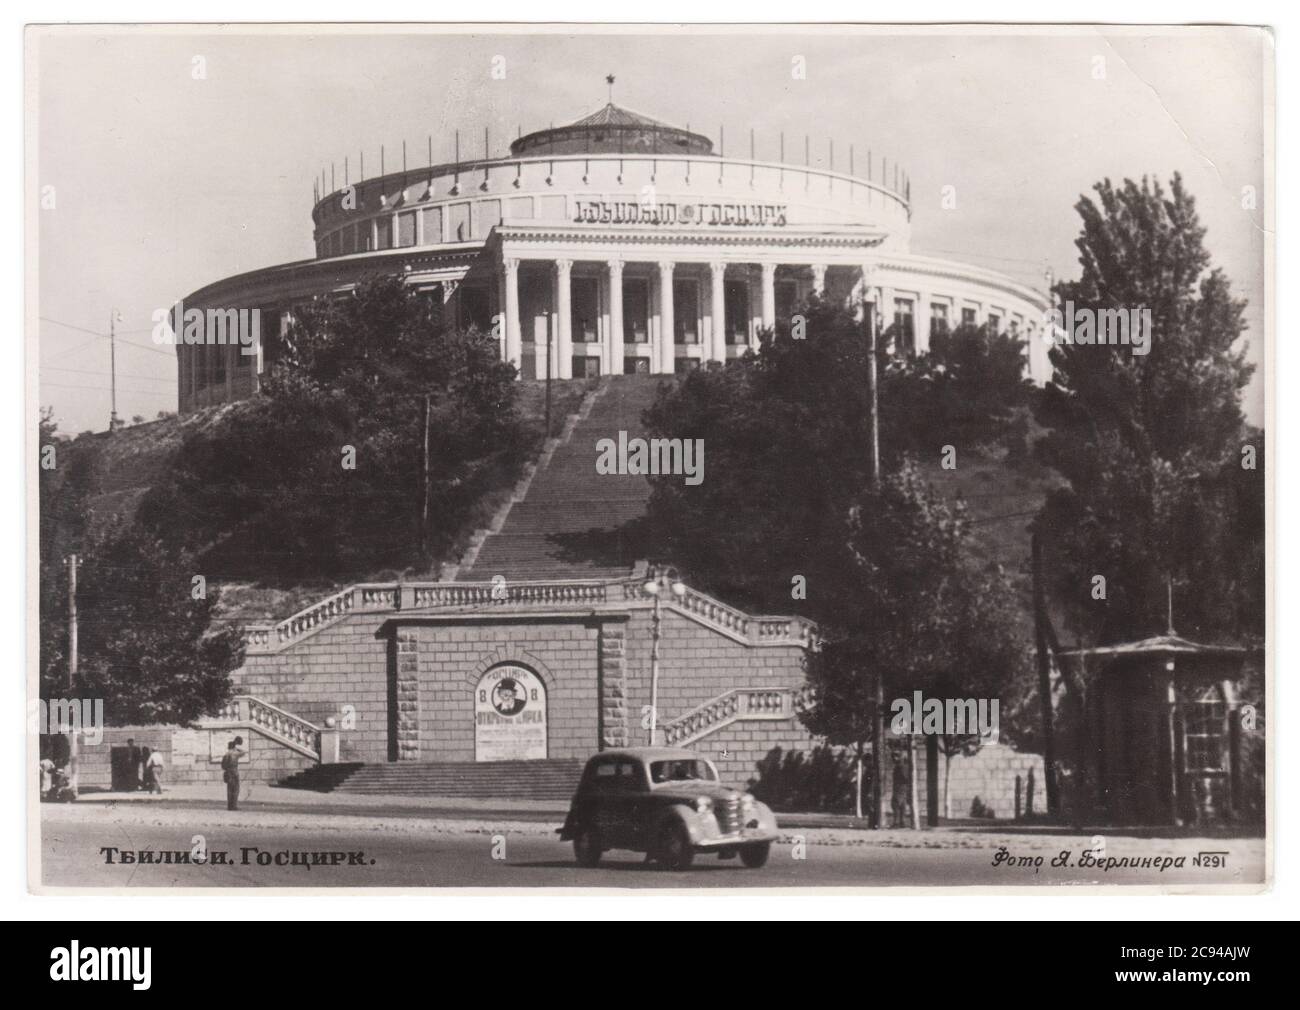 GEORGIA, USSR - CIRCA 1953: a postcard printed in CNTRY shows monochrome photograph of the Tbilisi Circus Stock Photo